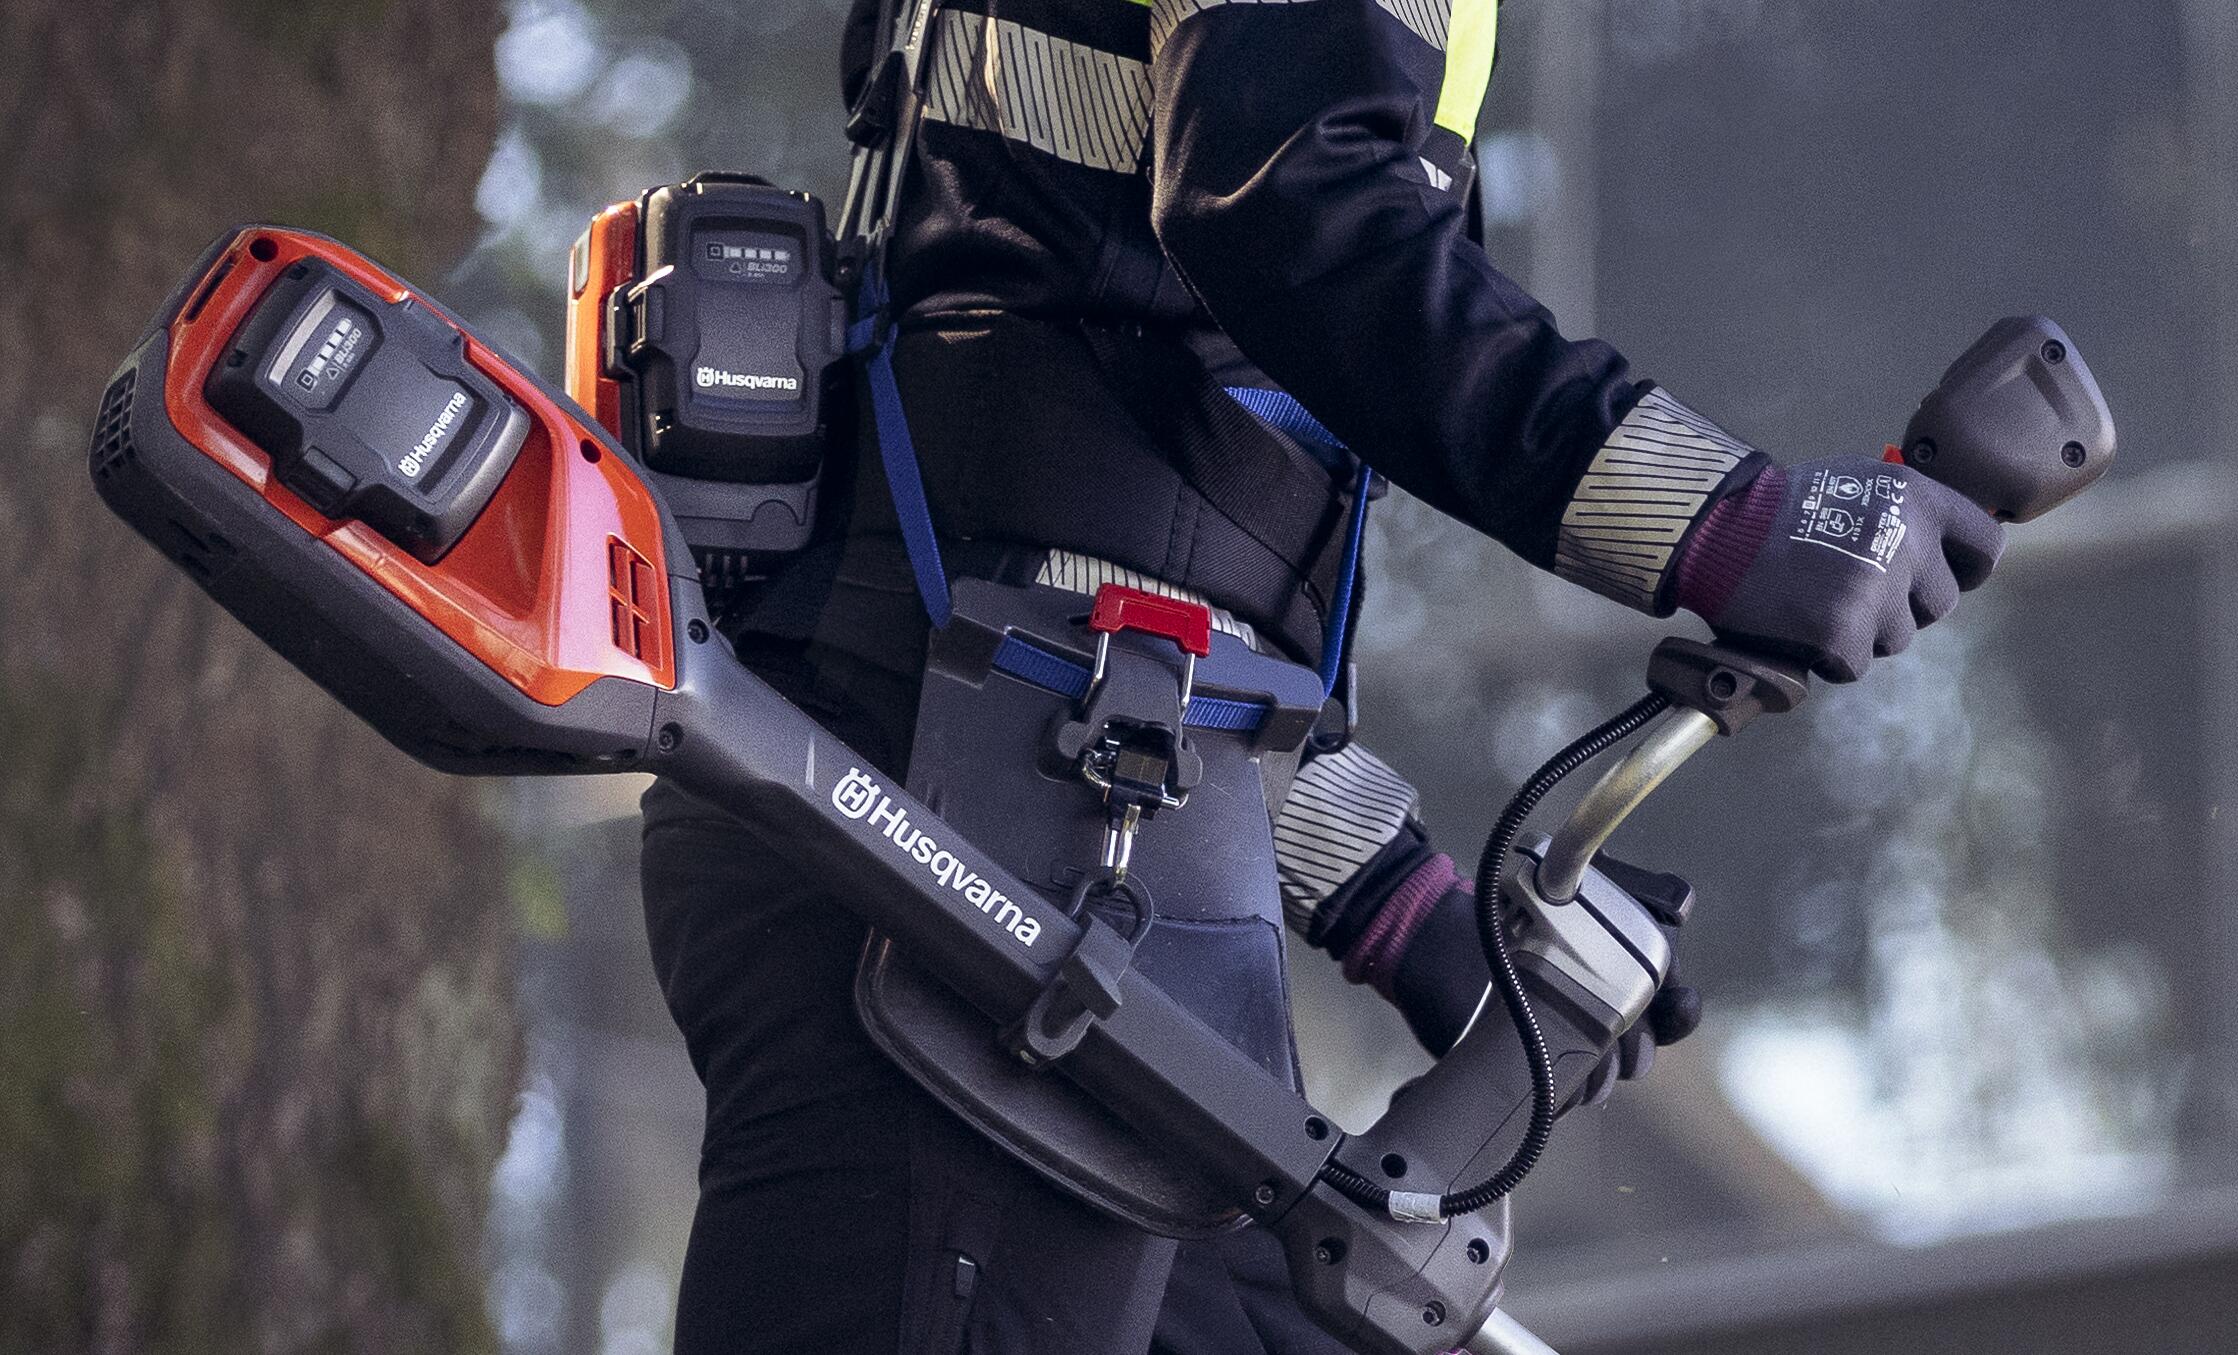 525i brushcutter and trimmers, Designed for professional use